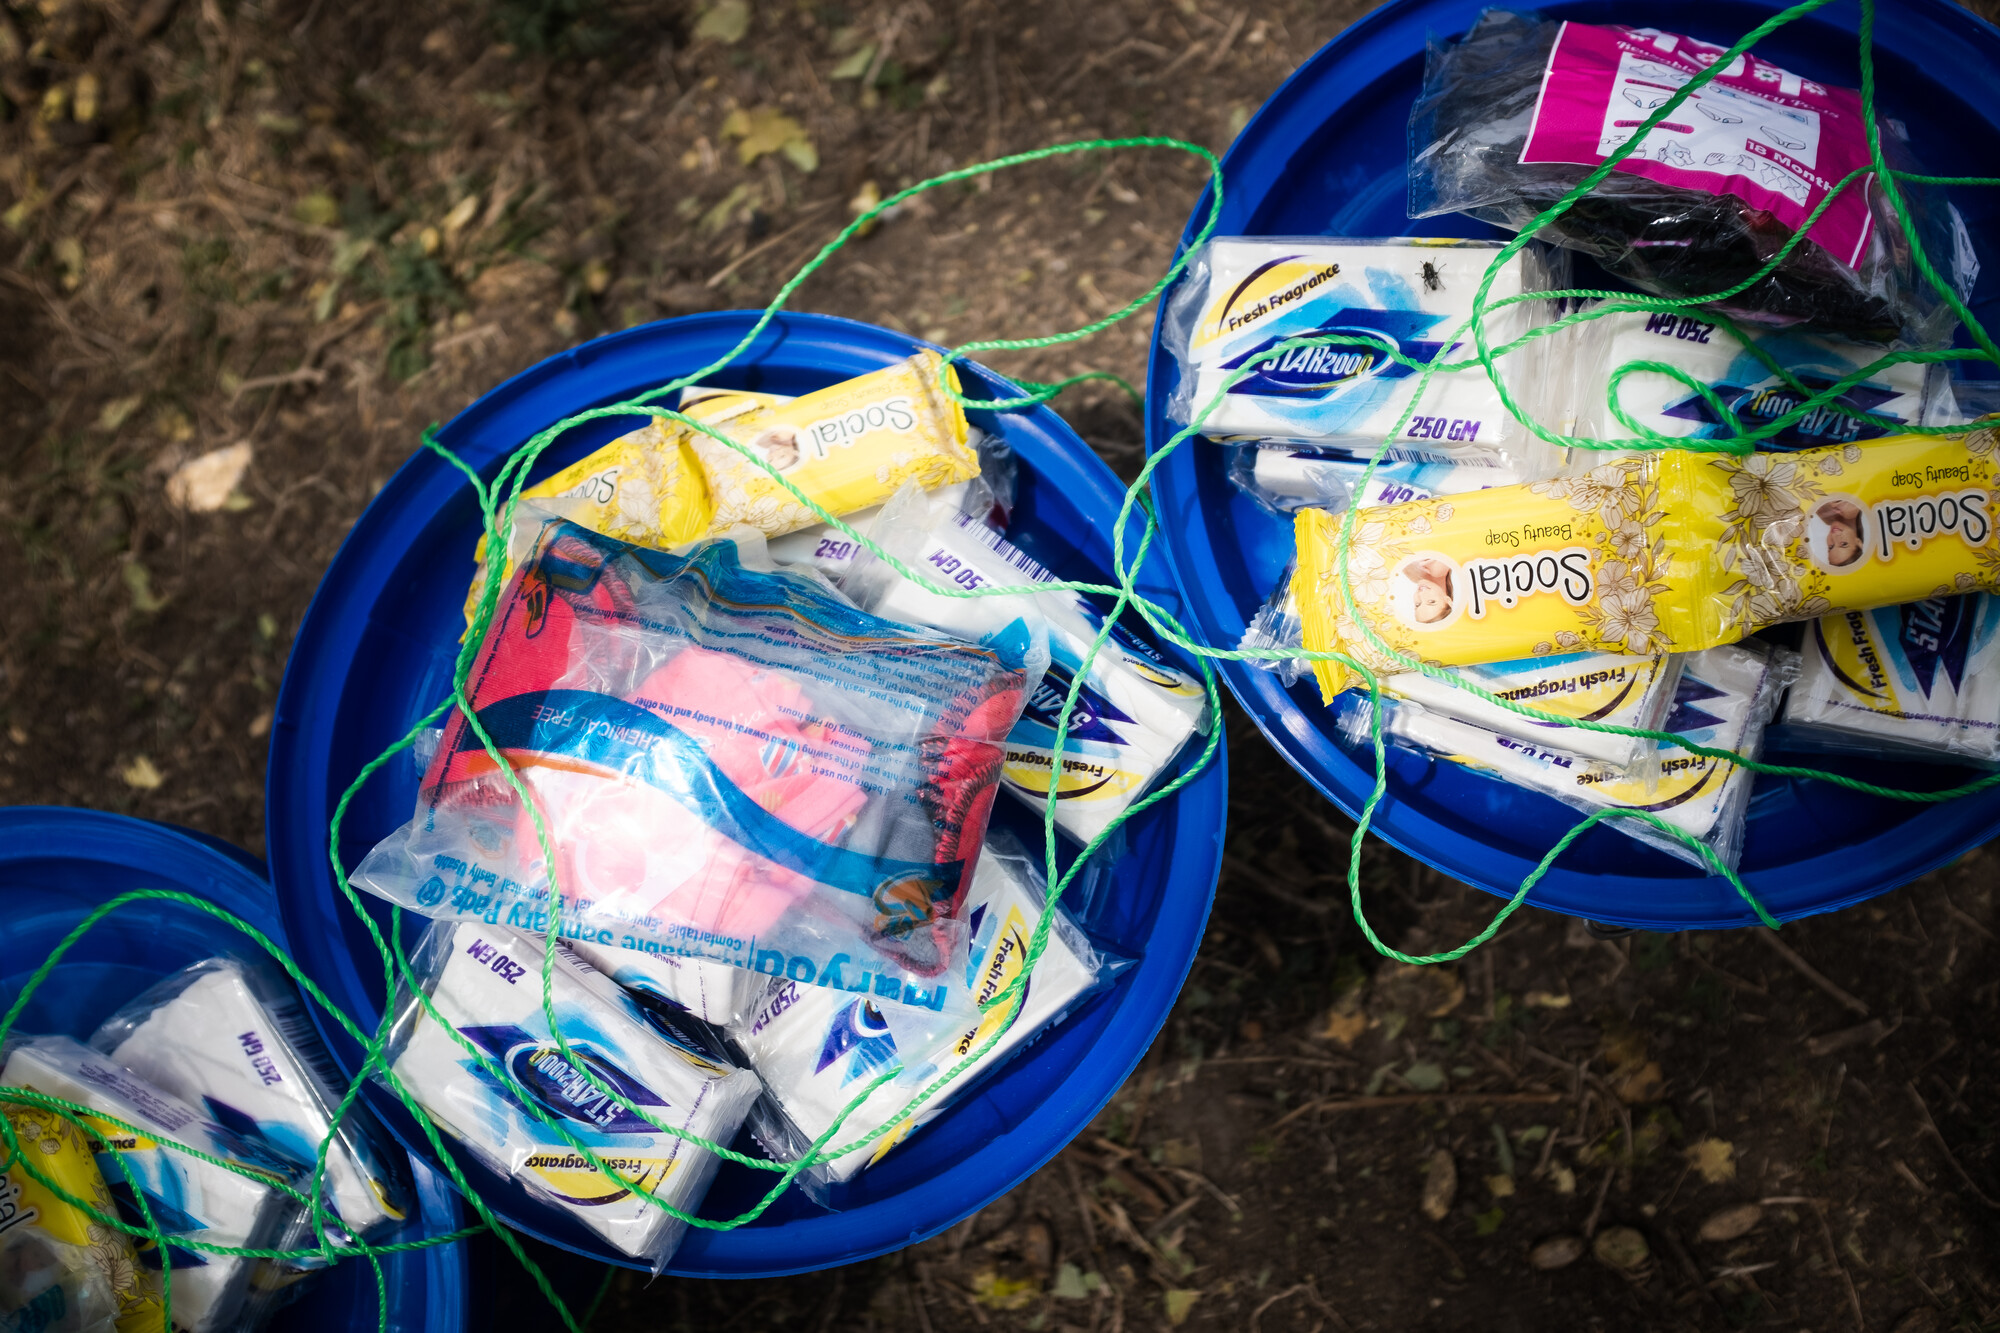 Two blue buckets show items in a dignity kit. Items include sanitary pads, body soap and undergarments.